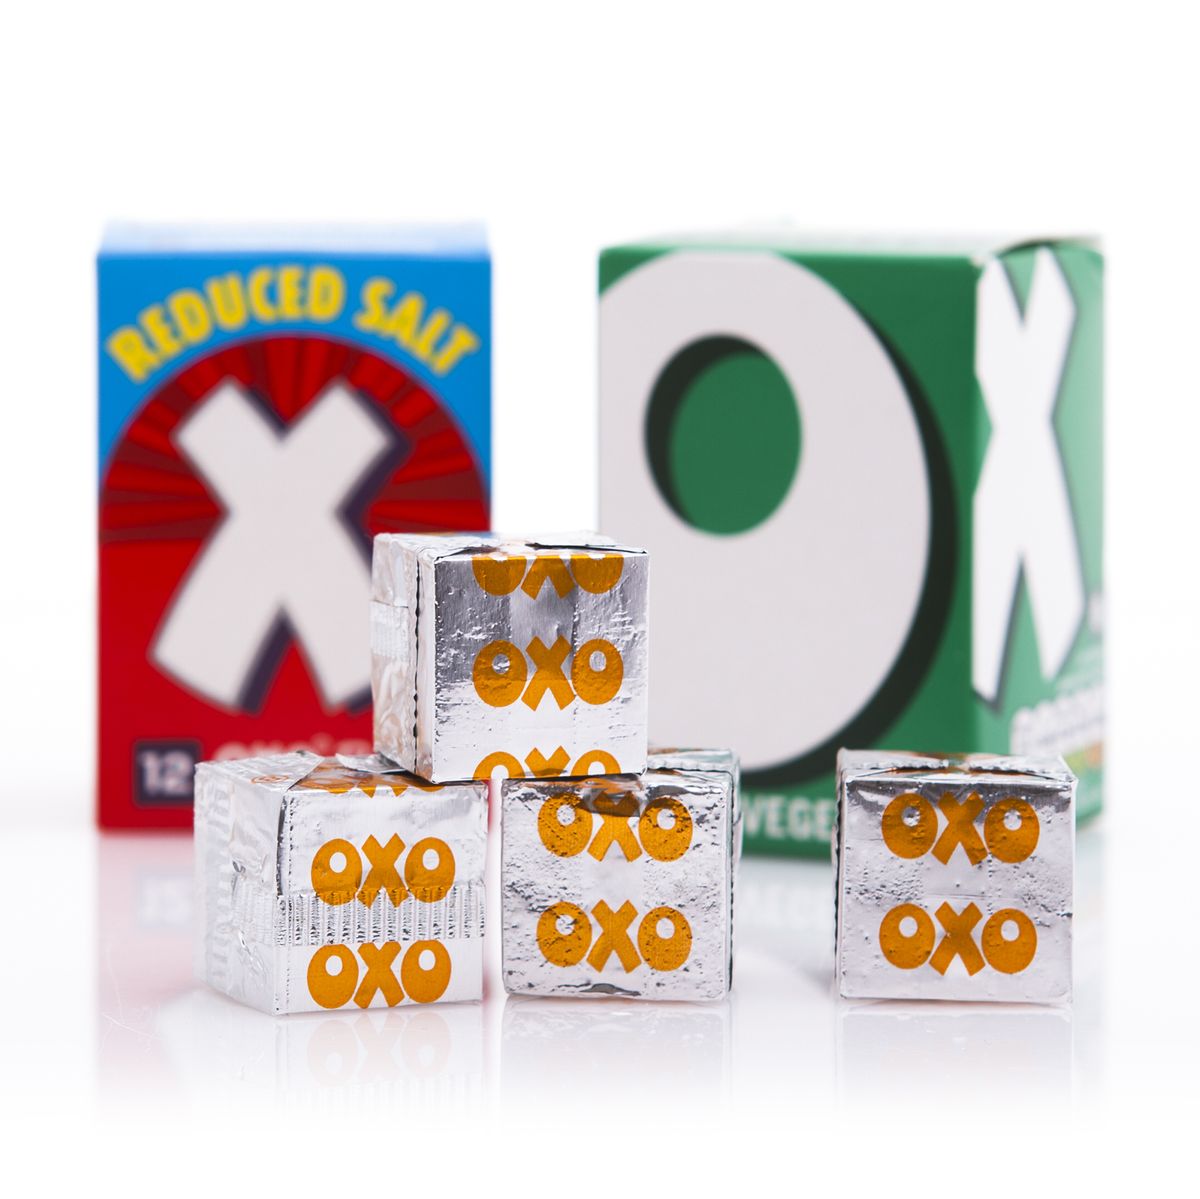 Nifty OXO Cube Hack Makes Cooking With Them A Lot Easier – How To Open OXO  Packet